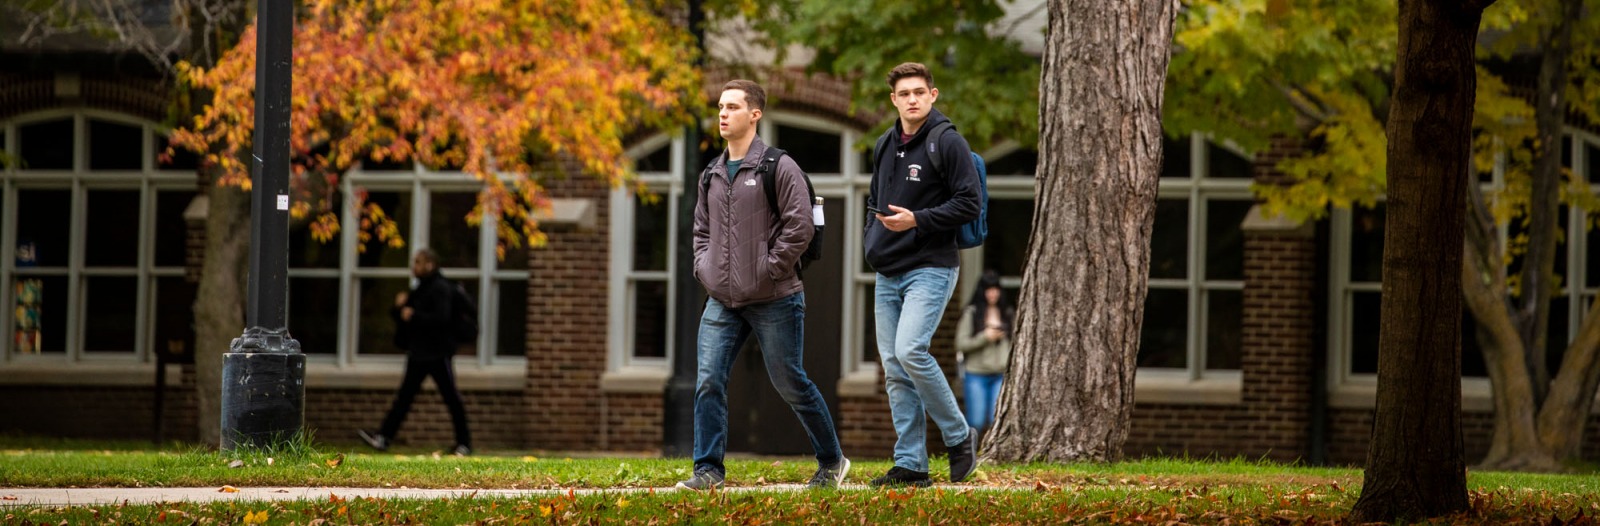 Students walk on campus with colorful fall leaves